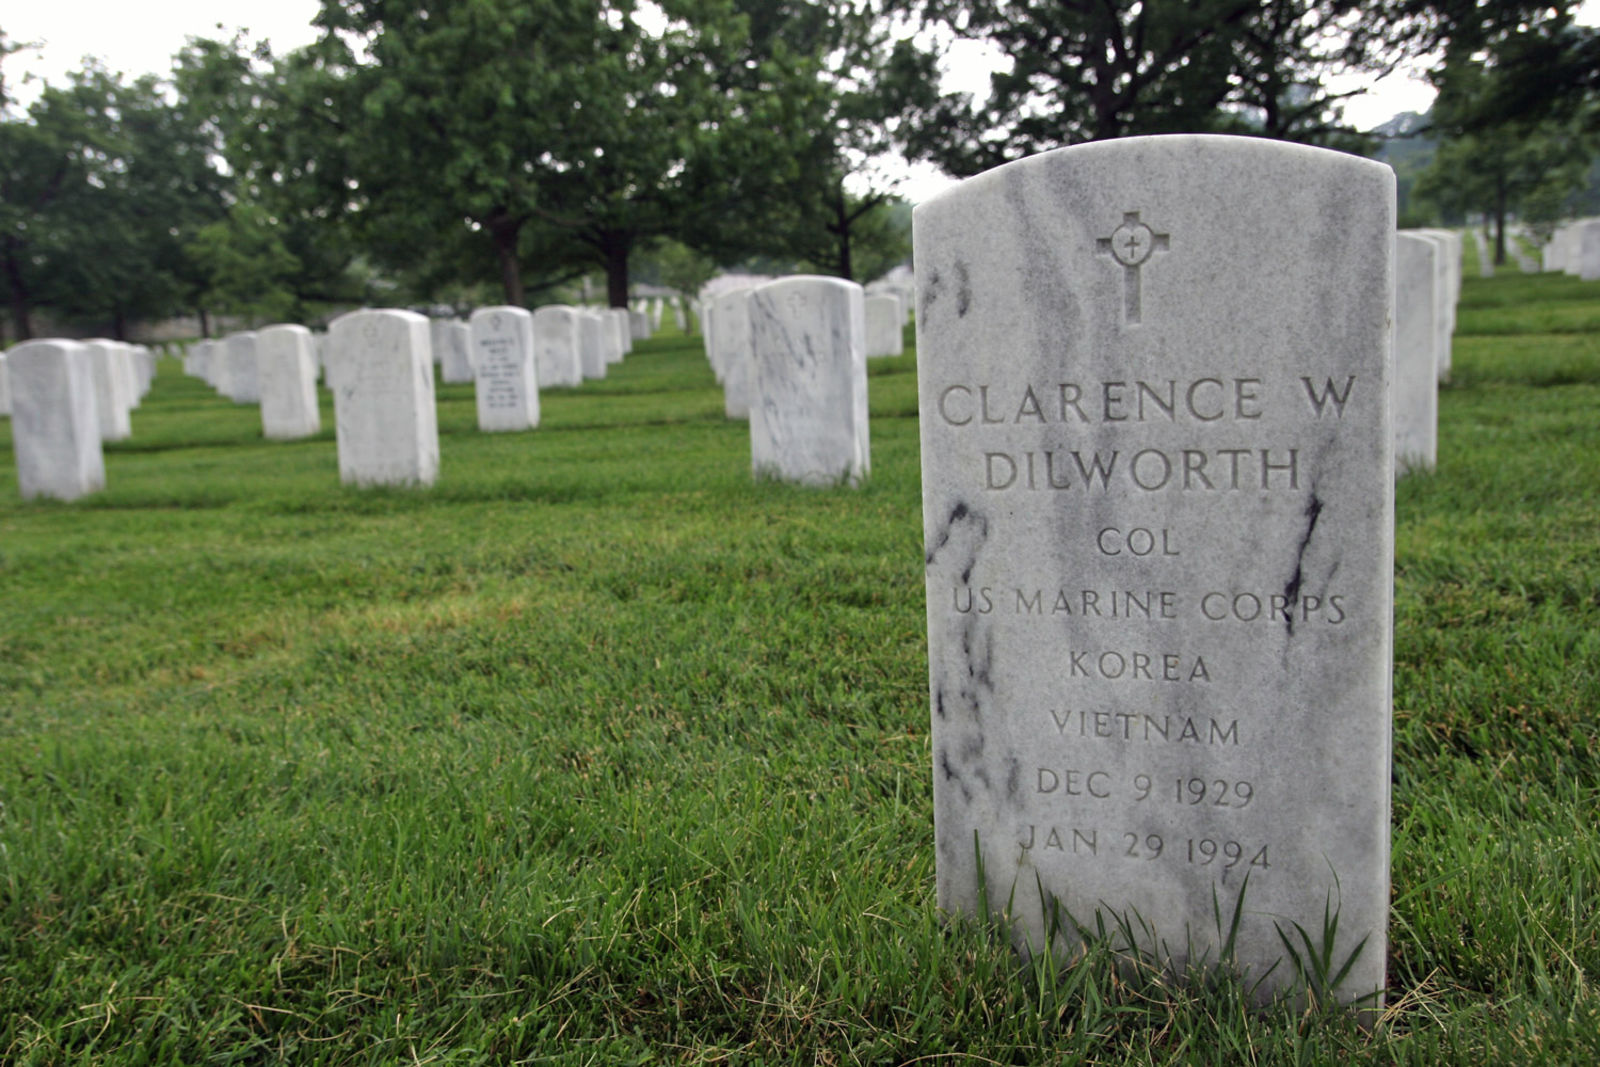 My father-in-law, interred at Arlington National Cemetery. 